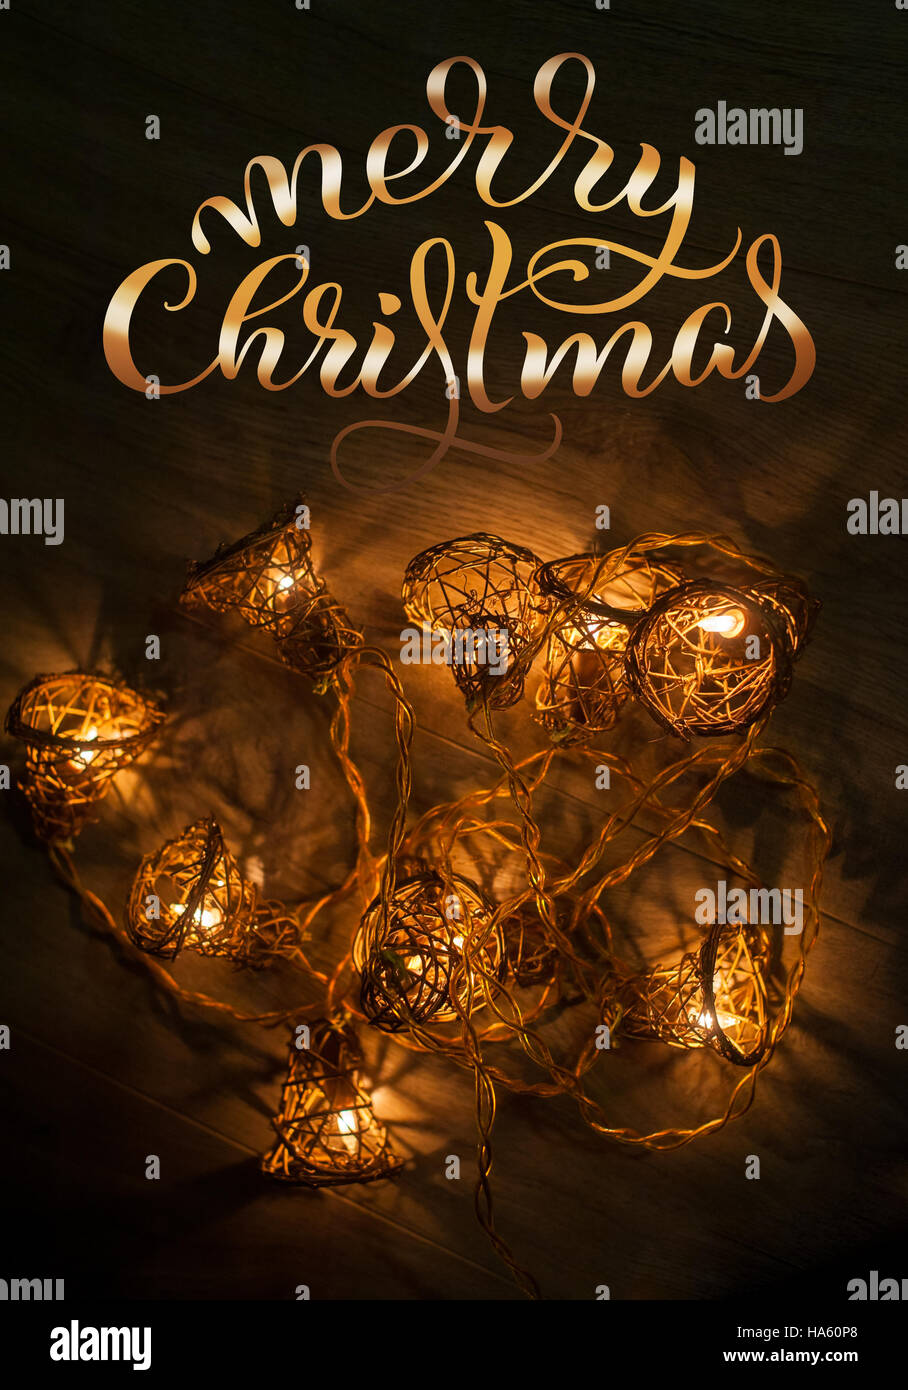 Holiday lights background for postcards and text Merry Christmas. Calligraphy lettering Stock Photo